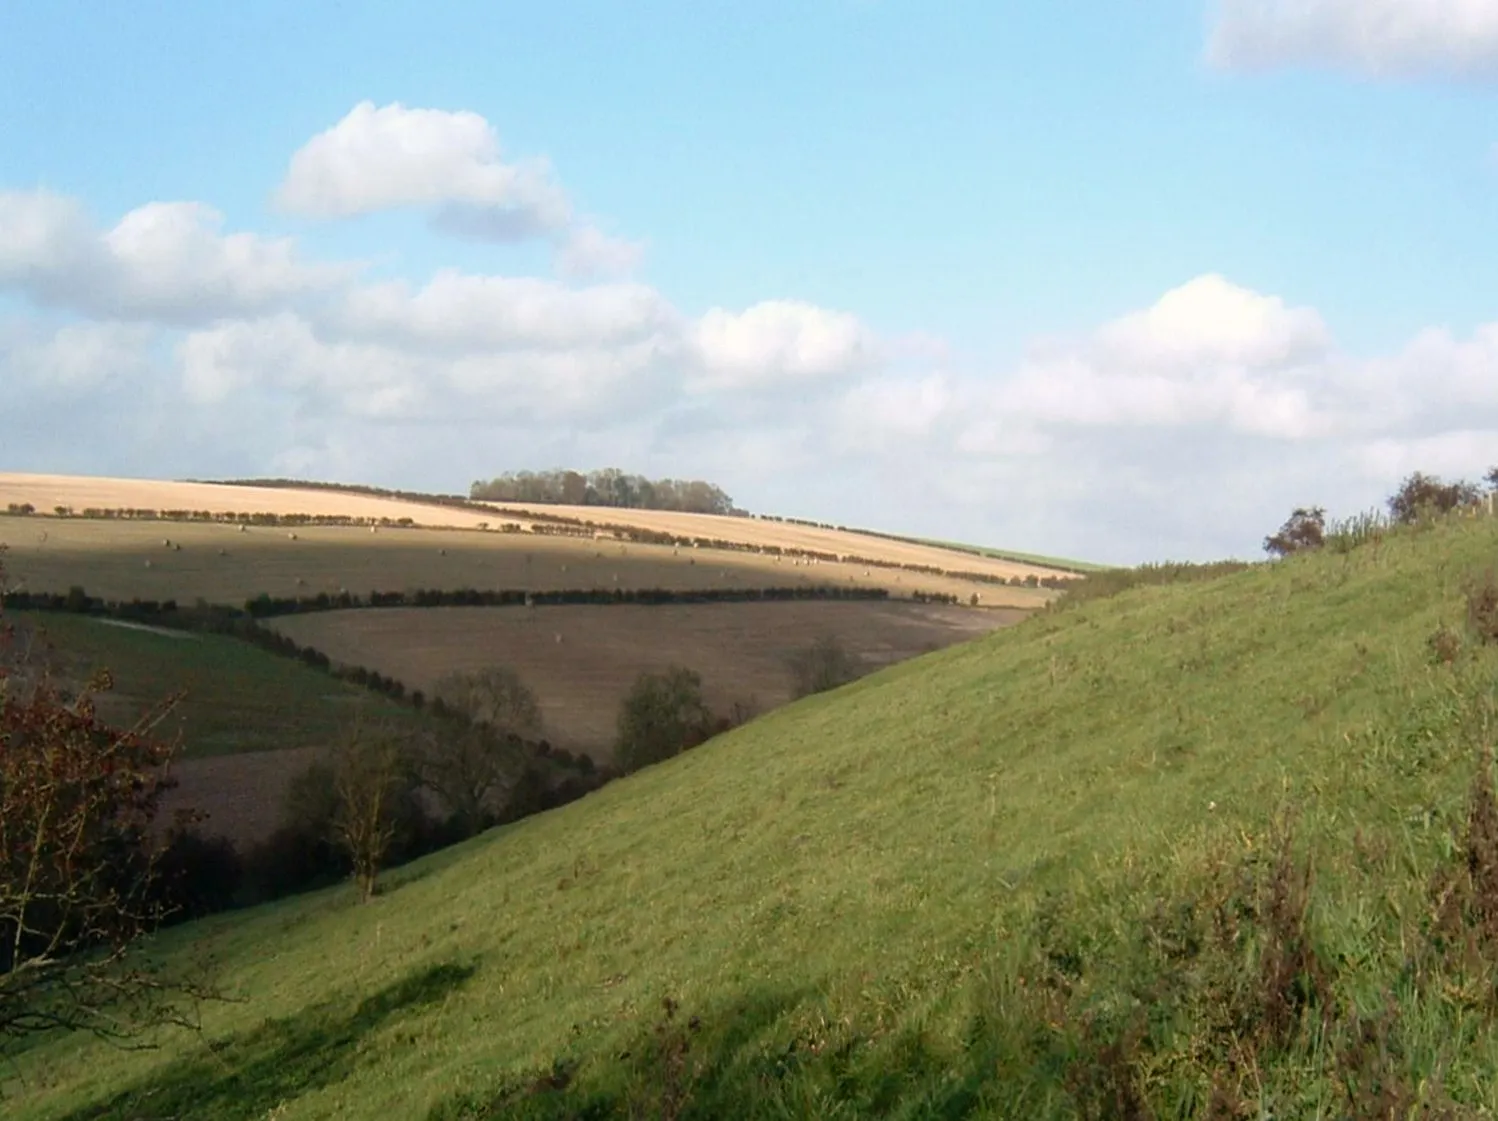 Photograph of Arras Hill, Yorkshire Wolds